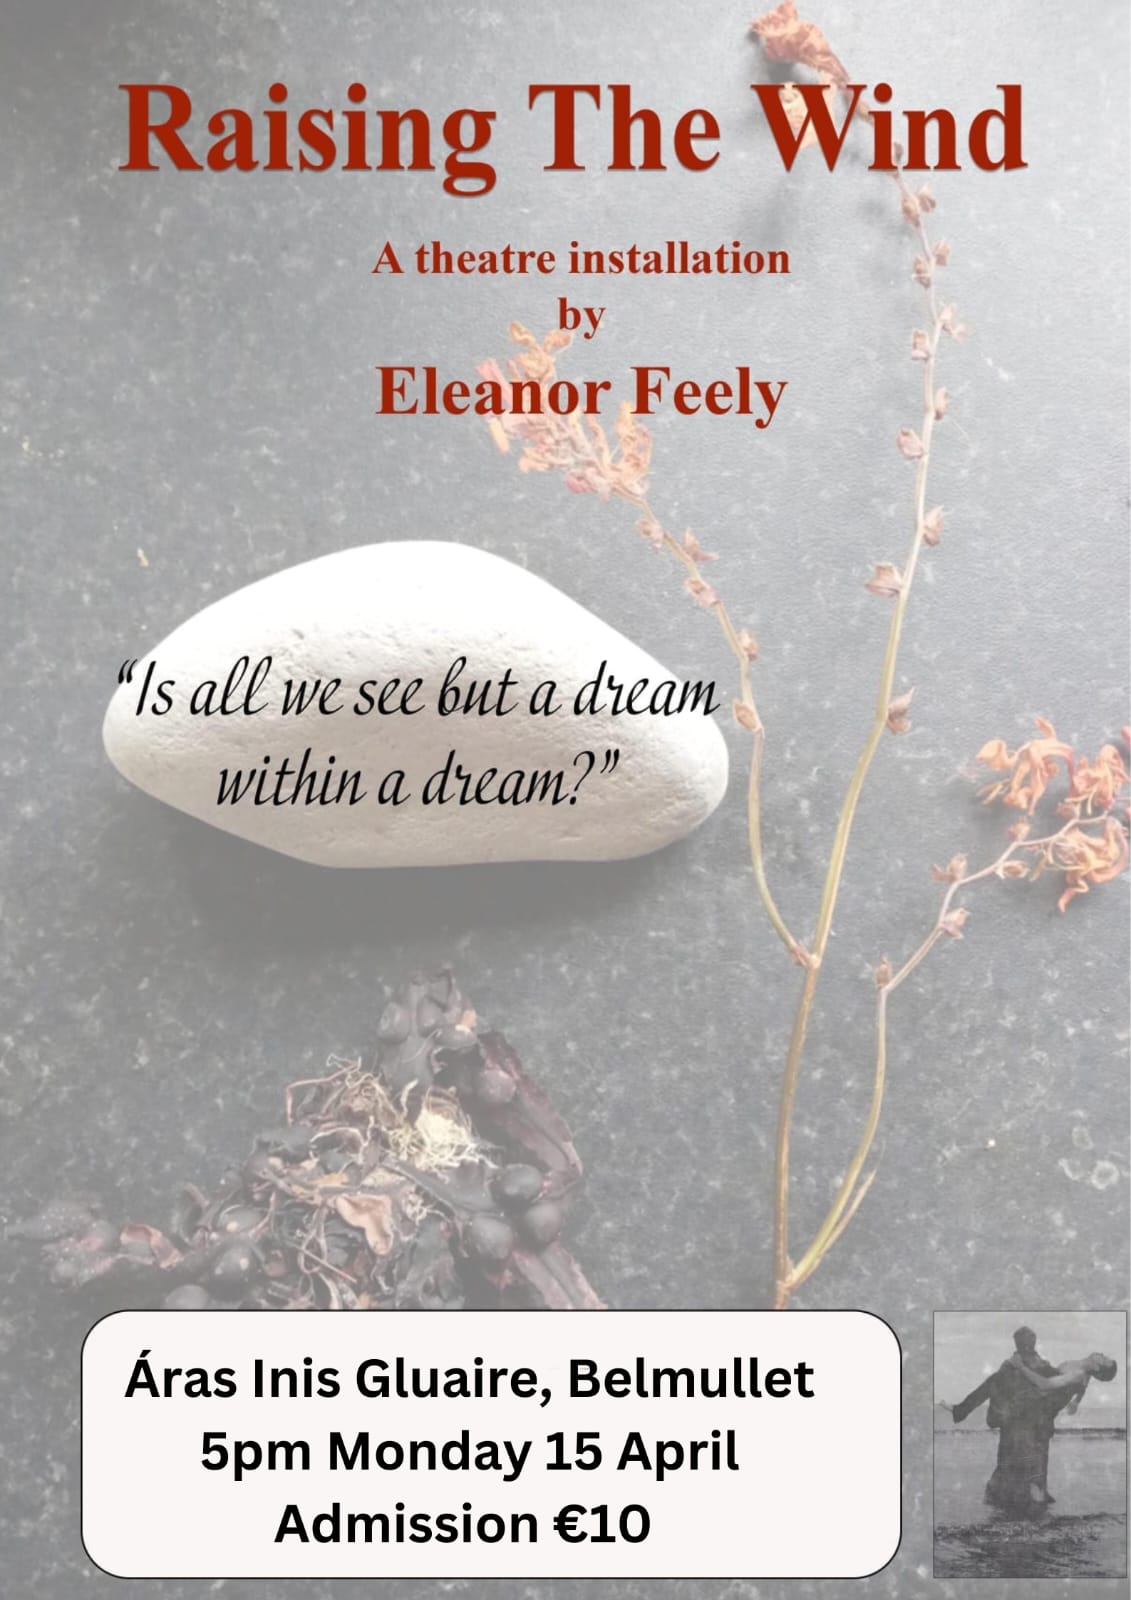 Raising The Wind by Eleanor Feely